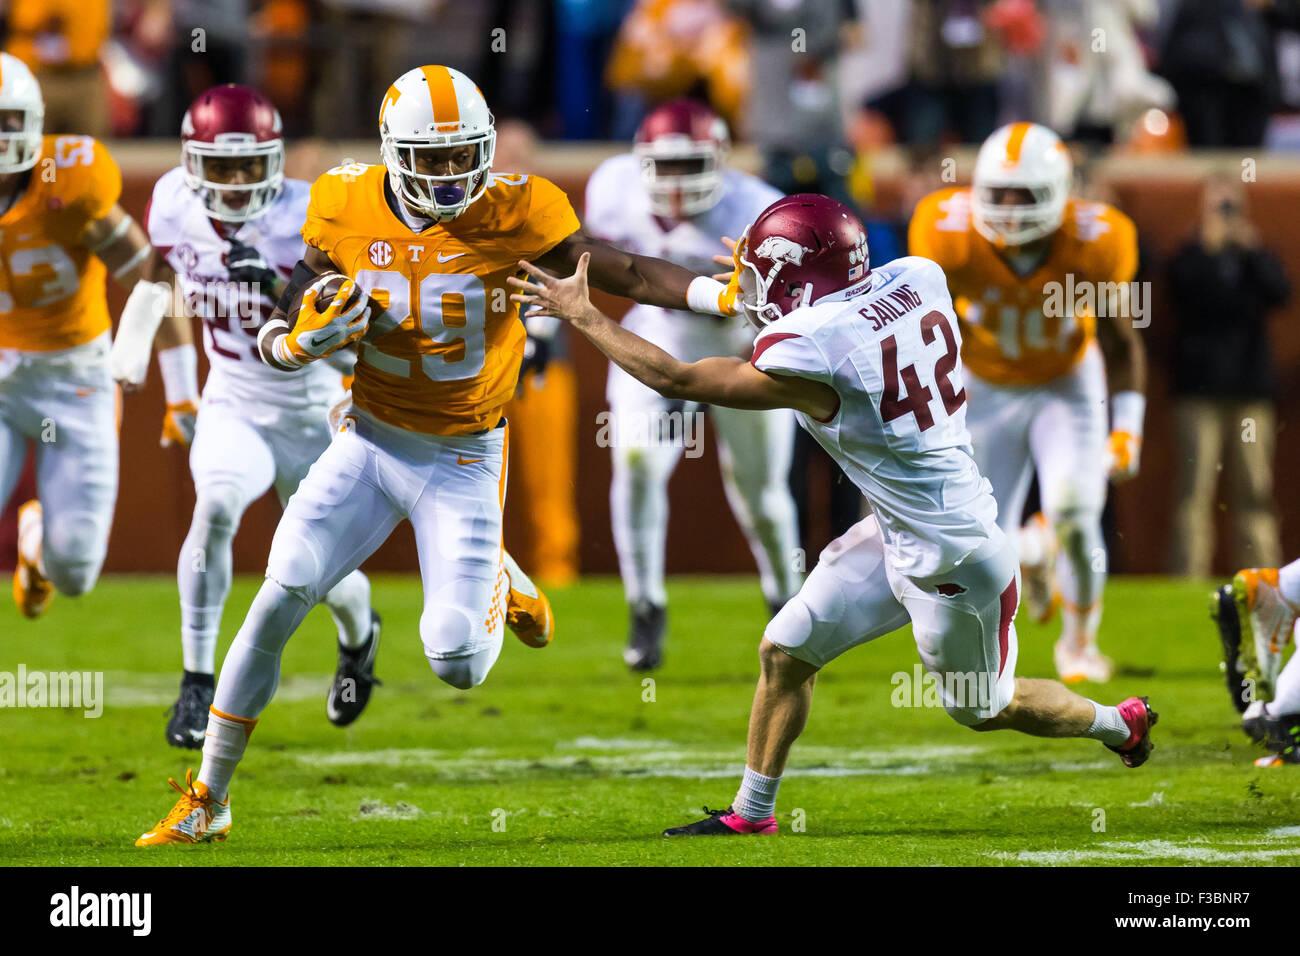 October 03, 2015: Lane Saling #42 of the Arkansas Razorbacks tries to tackle Evan Berry #29 of the Tennessee Volunteers as he returns the opening kick off for a touchdown during the NCAA Football game between the University of Tennessee Volunteers and the Arkansas Razorbacks at Neyland Stadium in Knoxville, TN Tim Gangloff/CSM Stock Photo